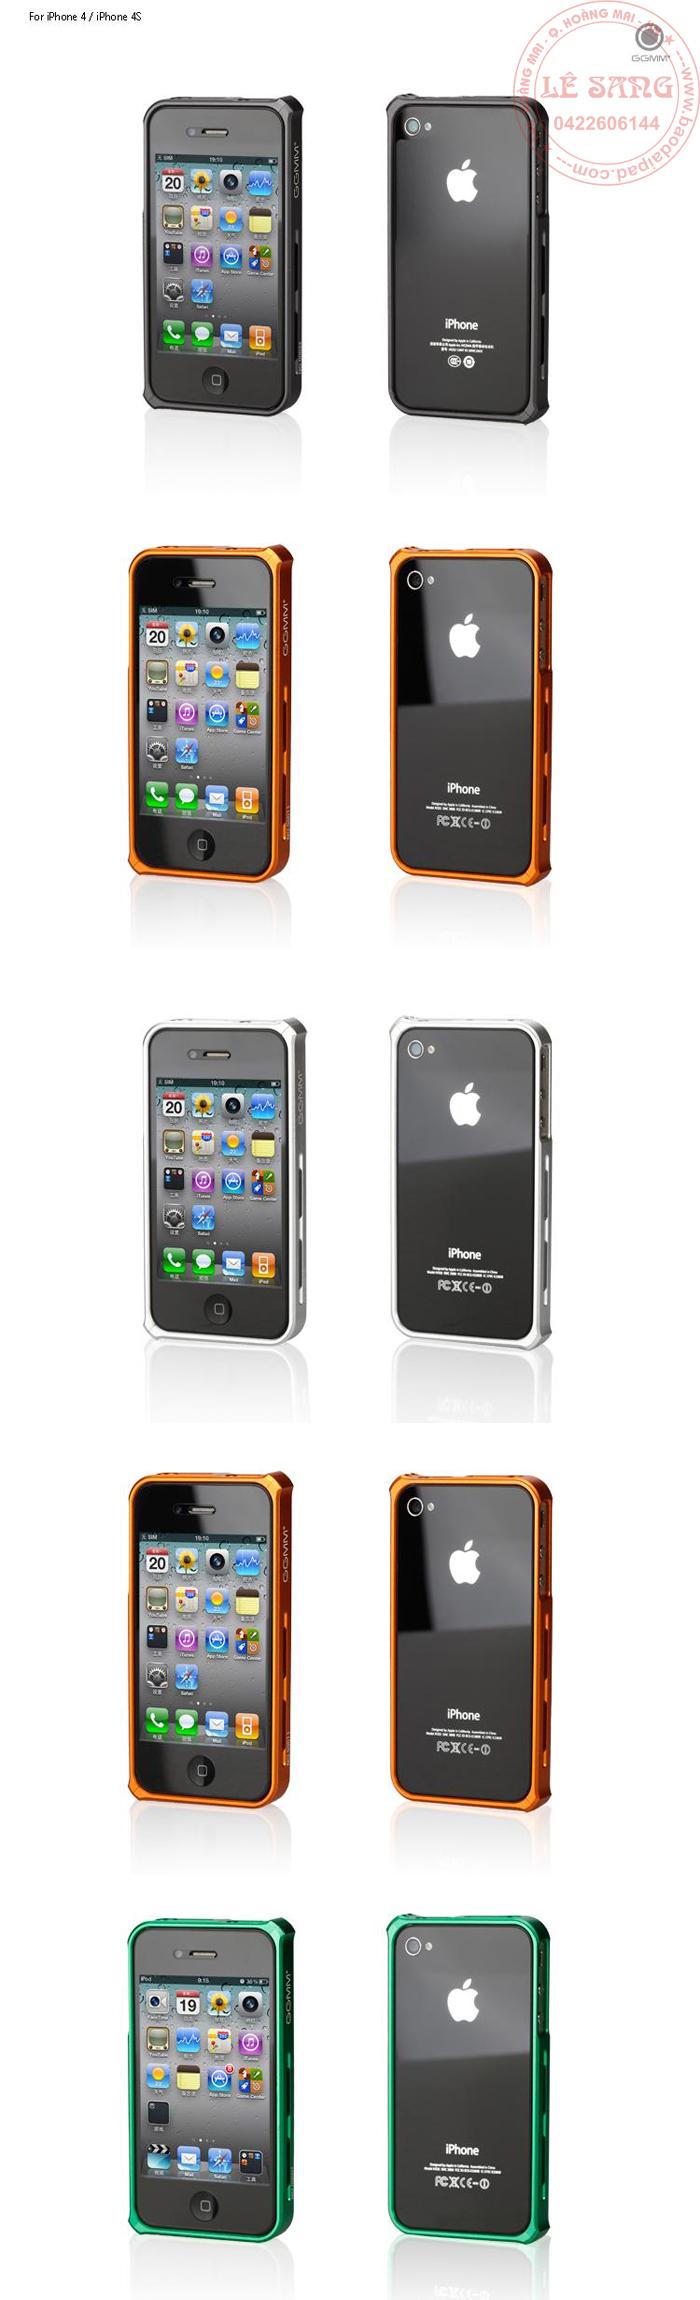 case iphone 4 S, 4 dhafgh